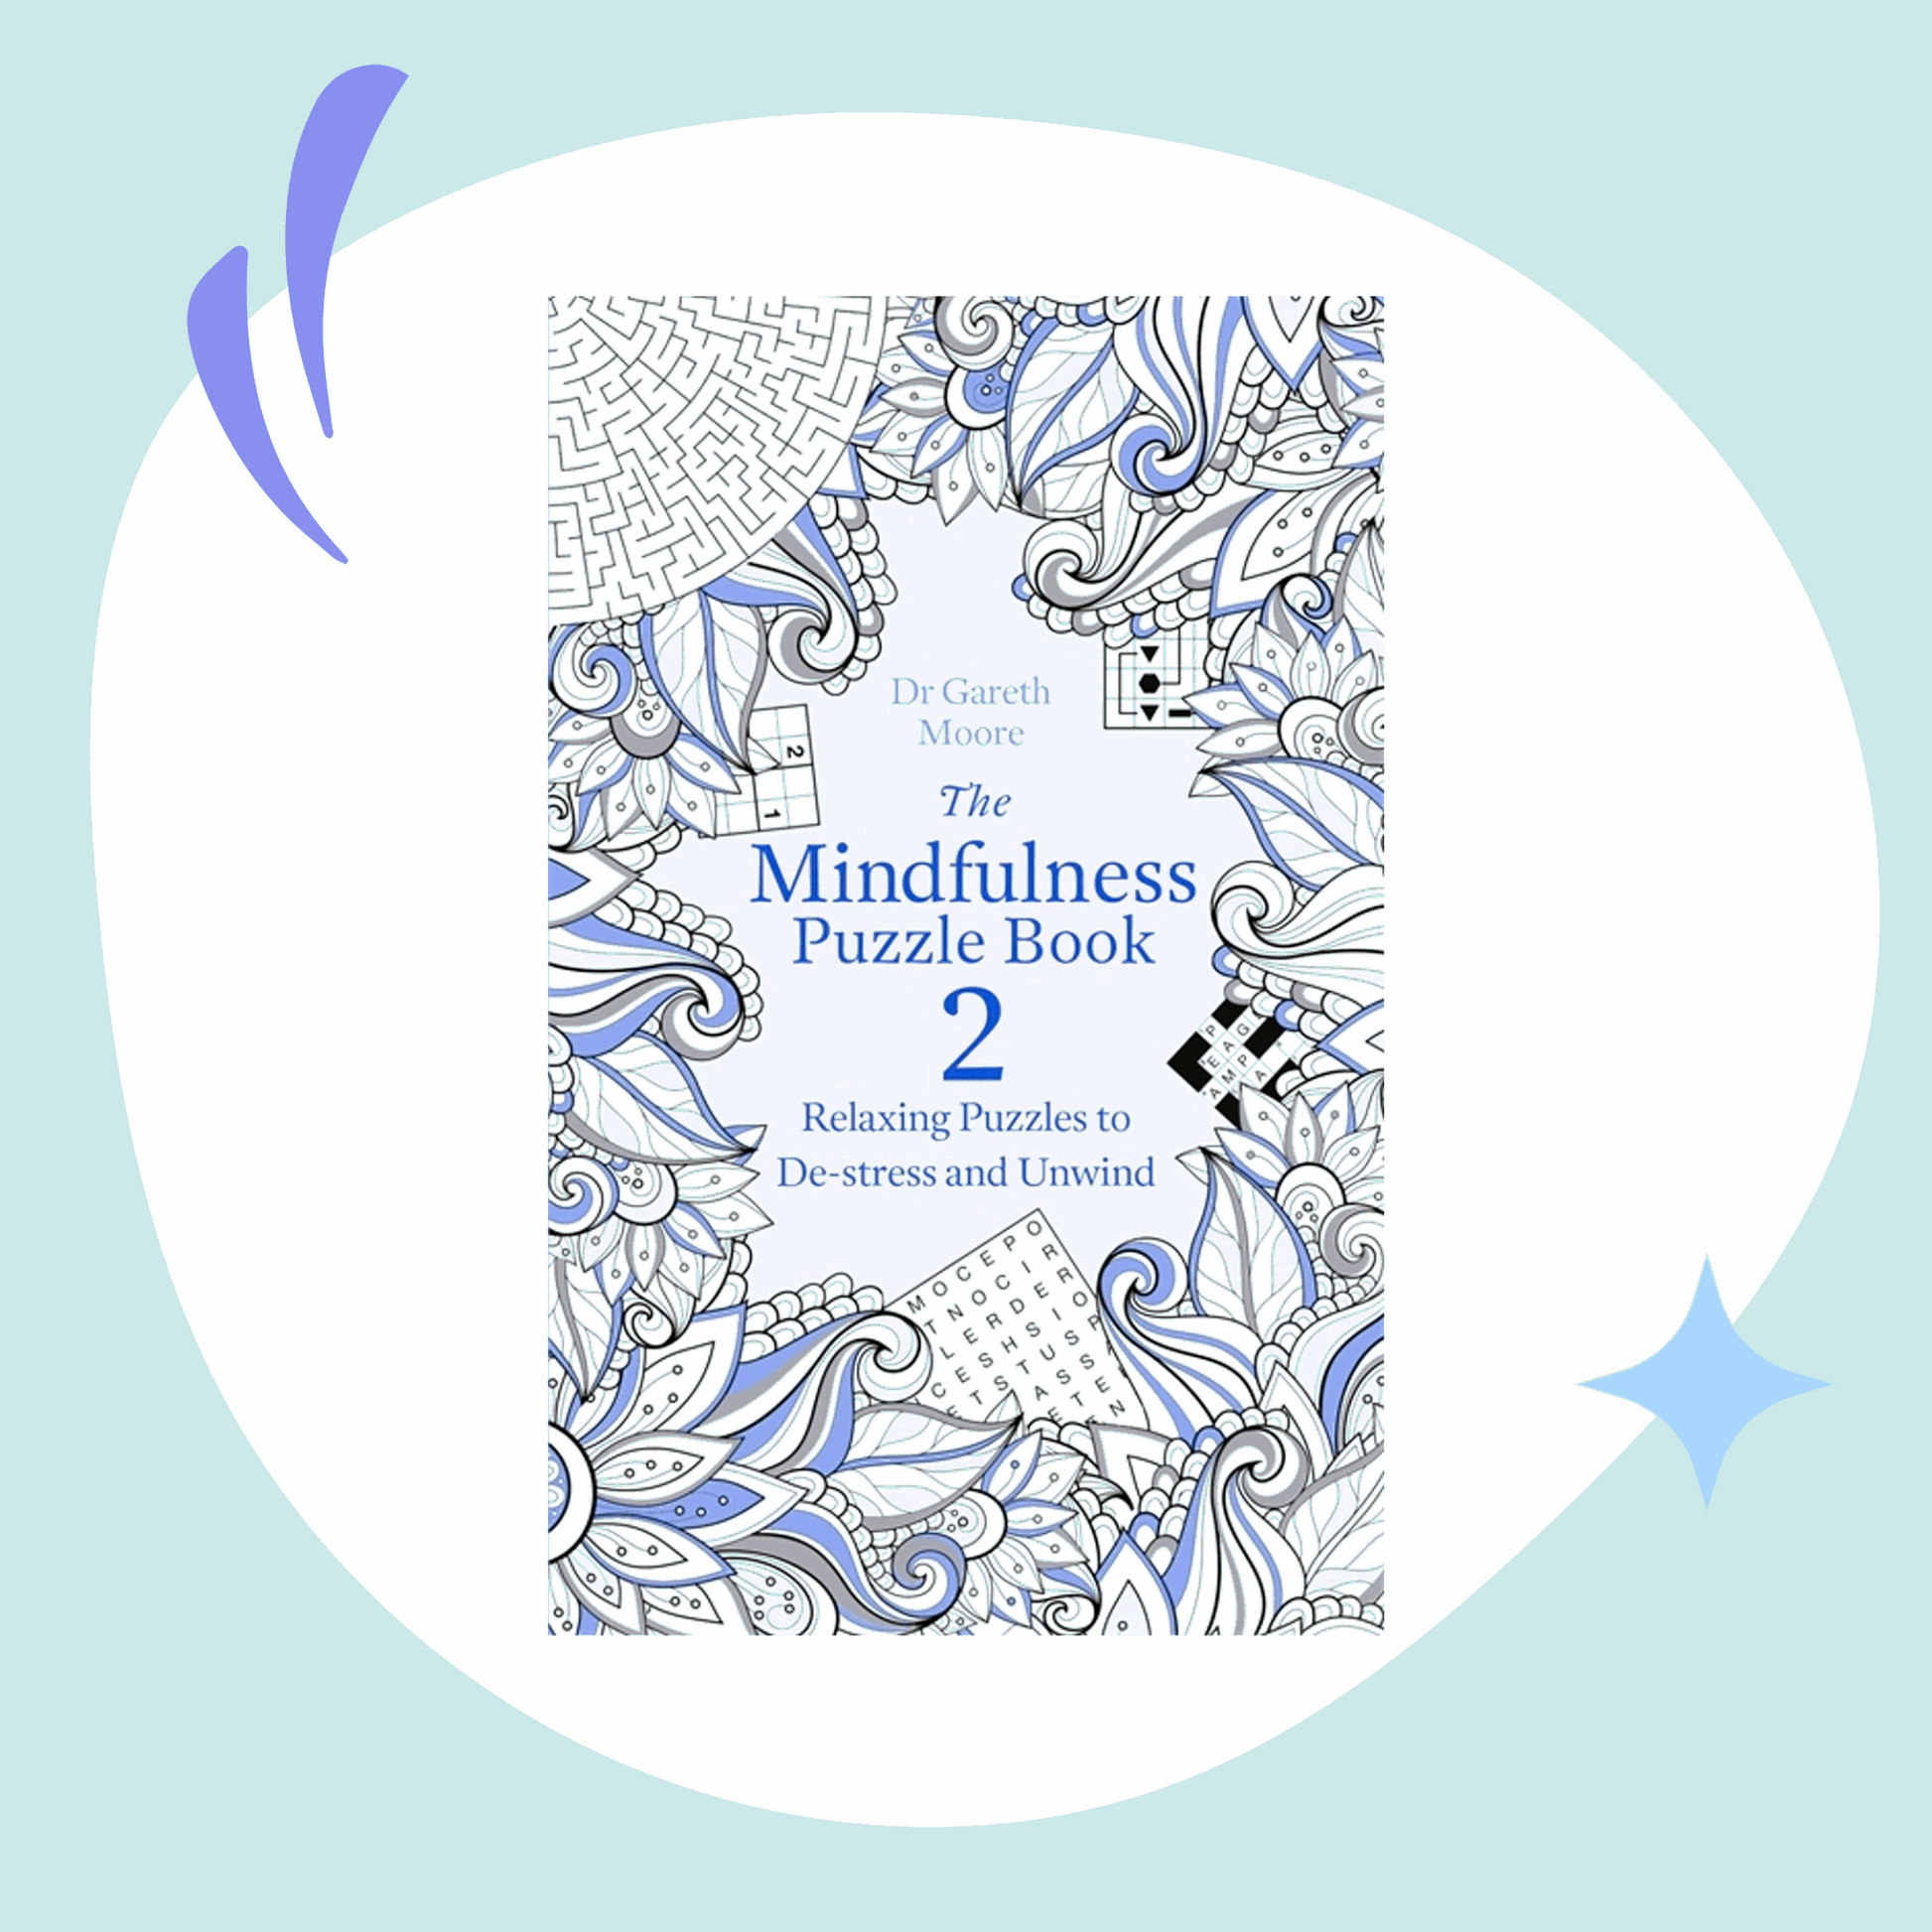 Mindfulness Puzzle Book 2: Relaxing Puzzles To De-Stress and Unwind